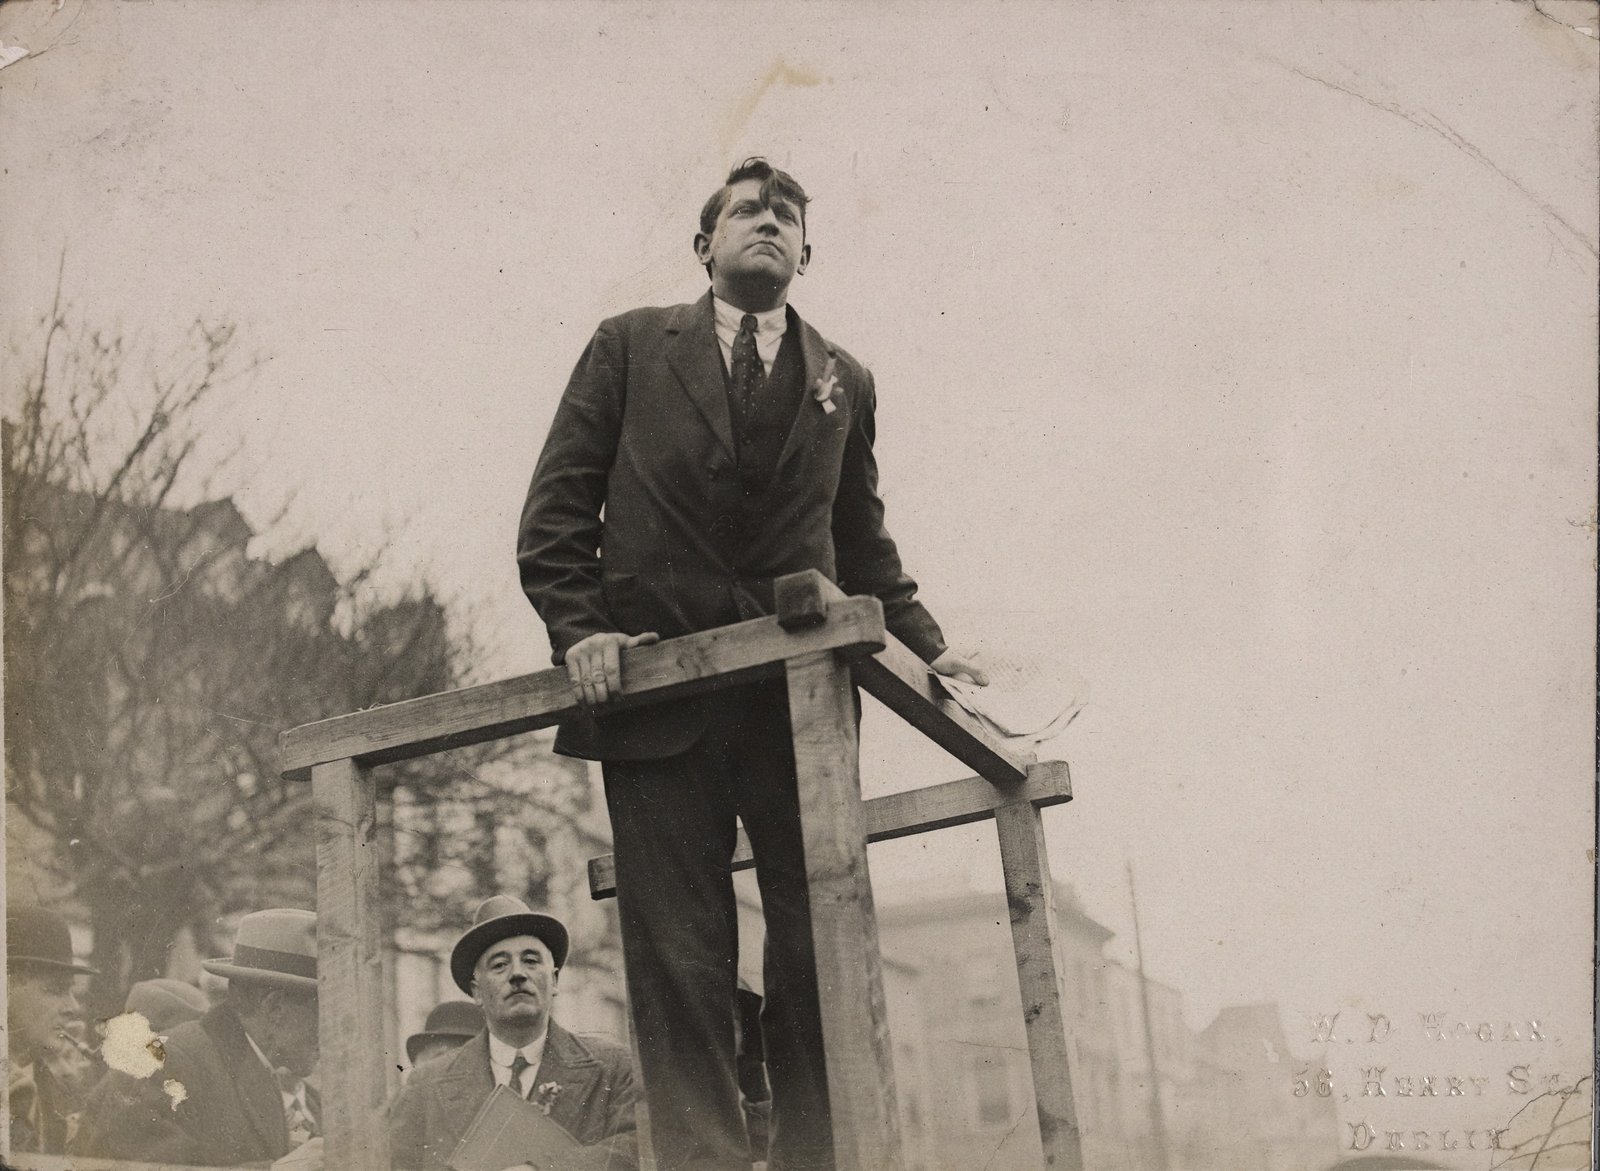 Image - "The Defiant Chief": Michael Collins speaking from podium. Image courtesy of the National Library of Ireland